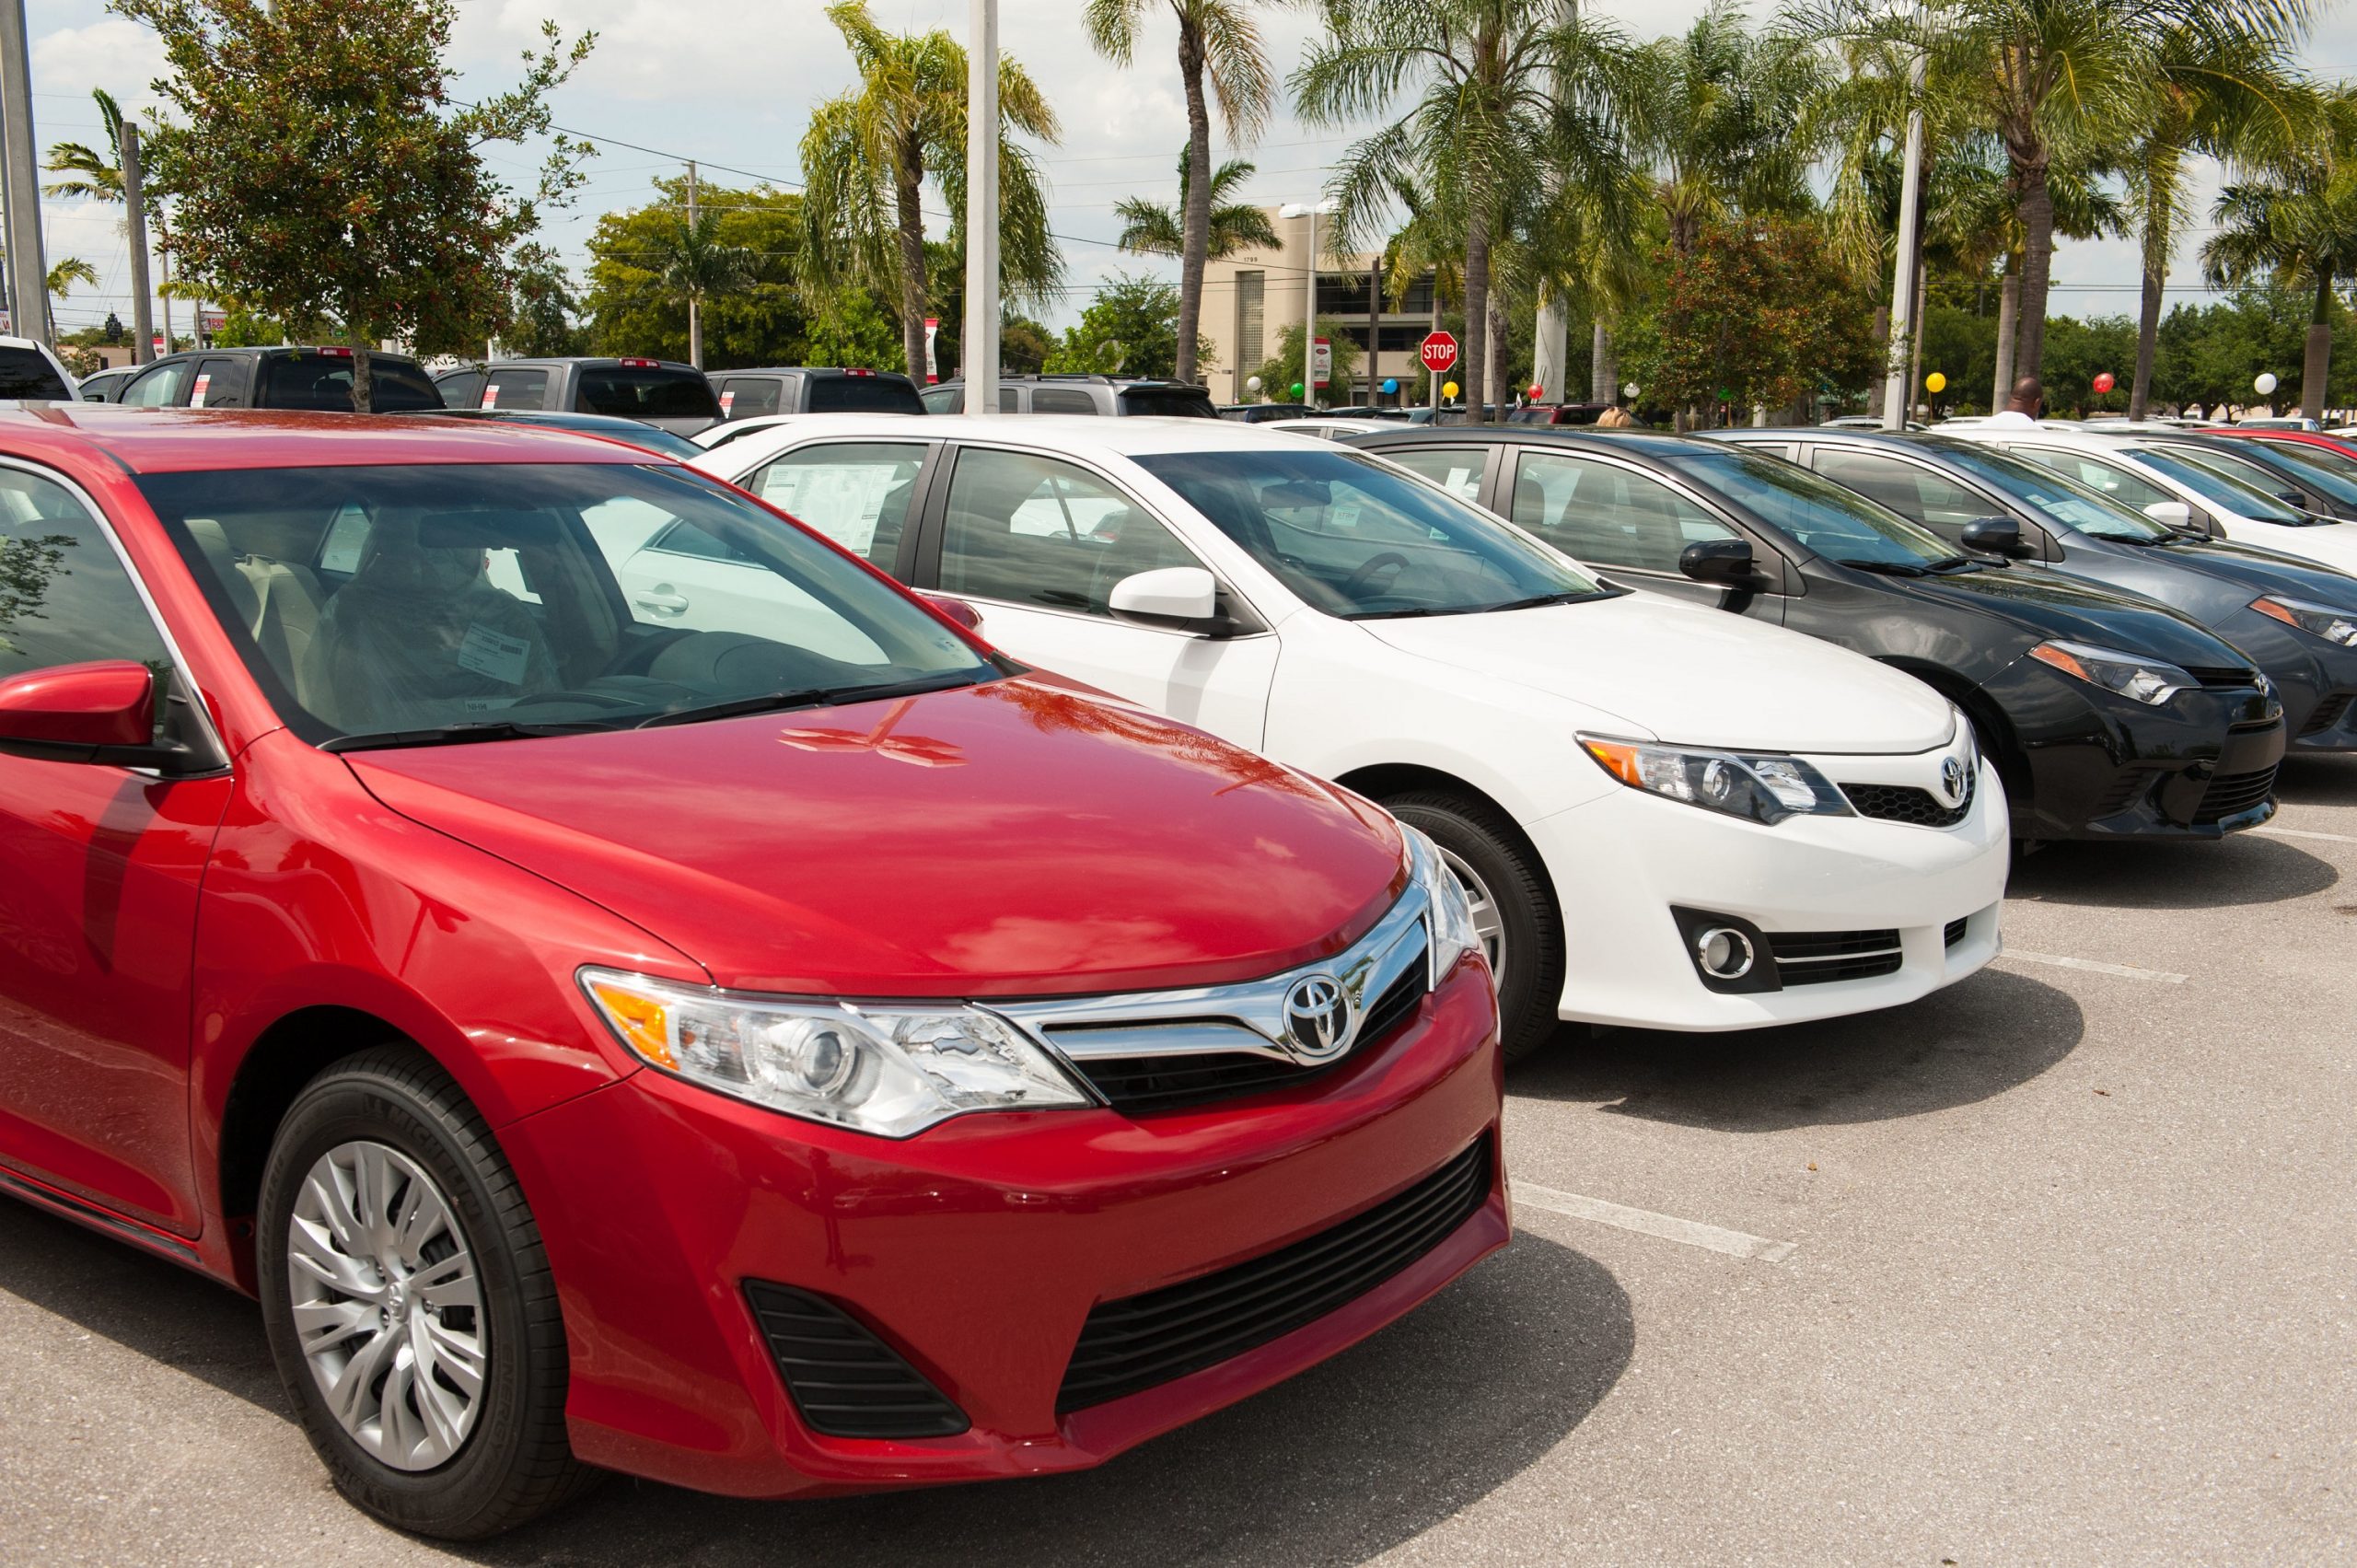 A group of Toyota Camry sedans on a dealer lot circa 2014